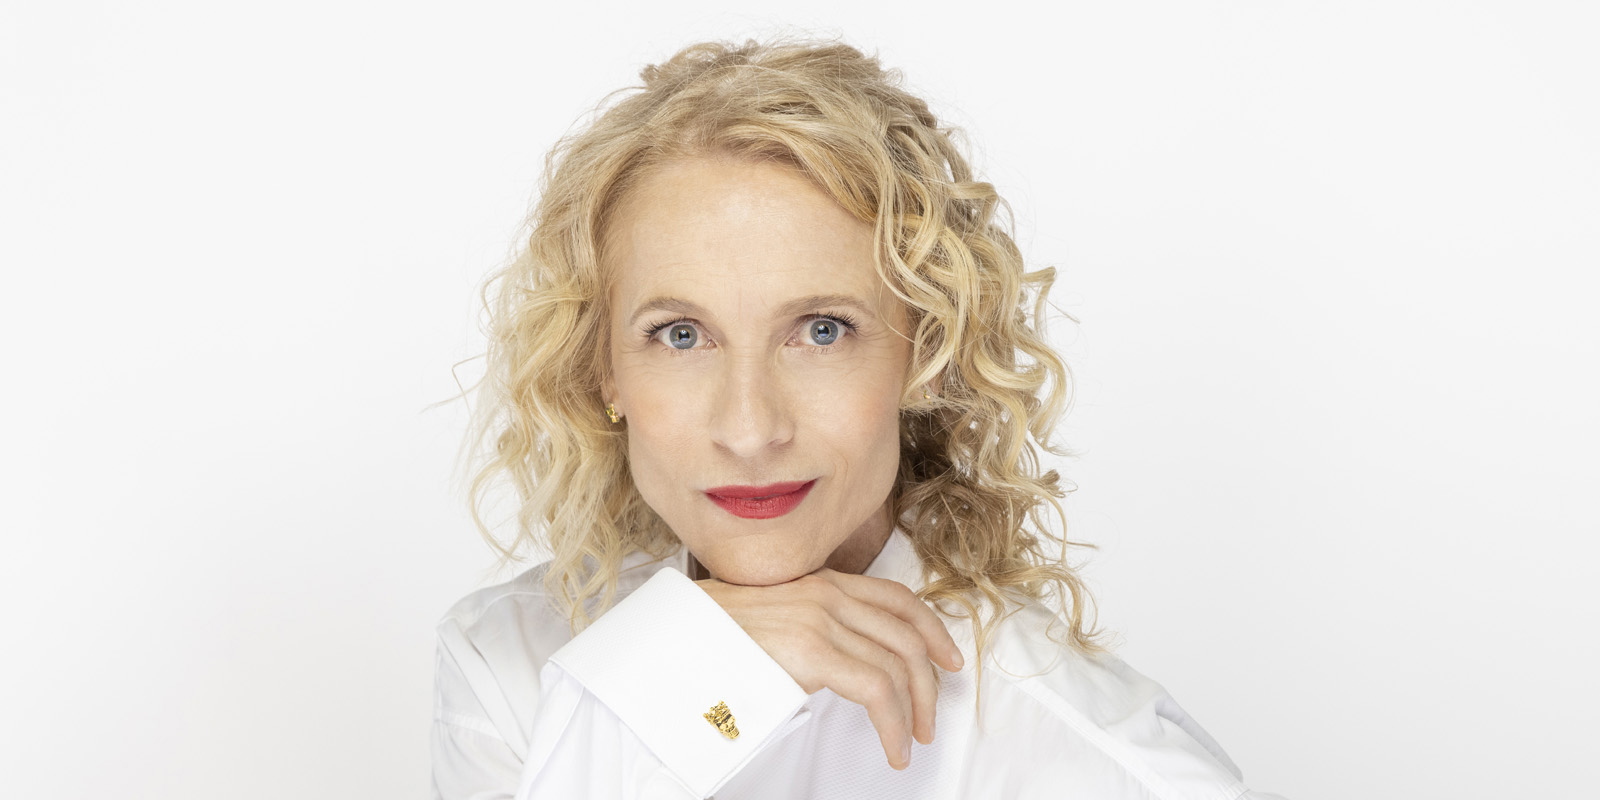 headshot of blond curly haired lady in white shirt 